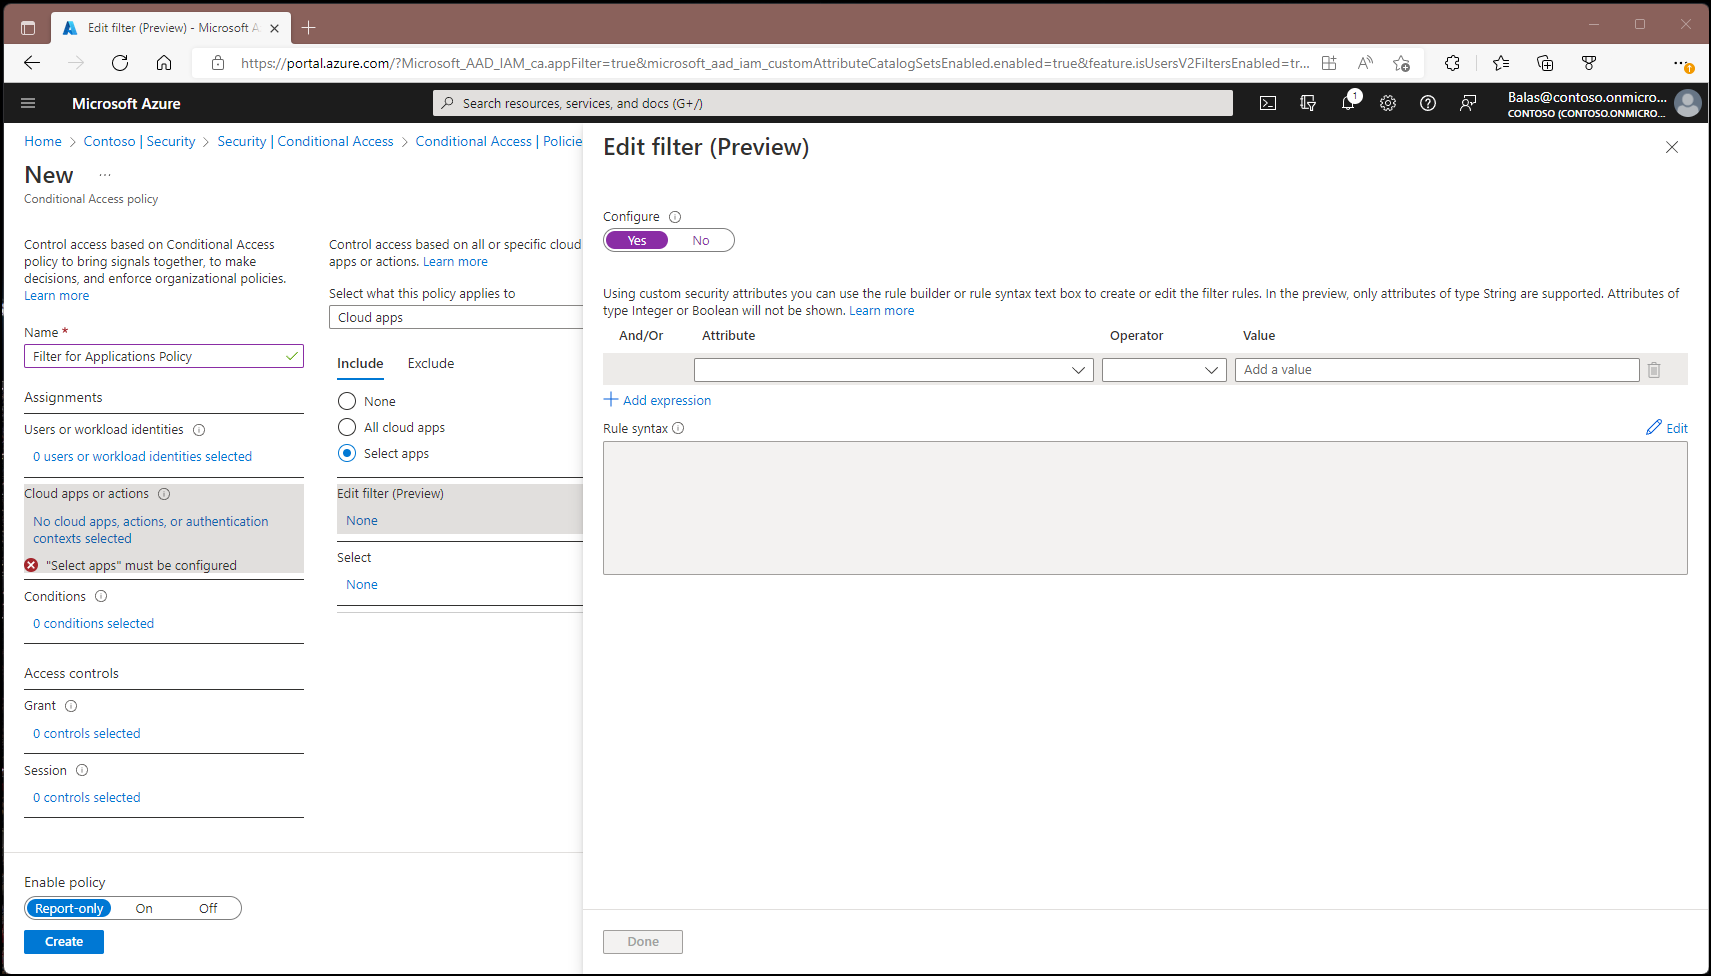 A screenshot showing a Conditional Access policy with the edit filter window showing an attribute of require MFA.